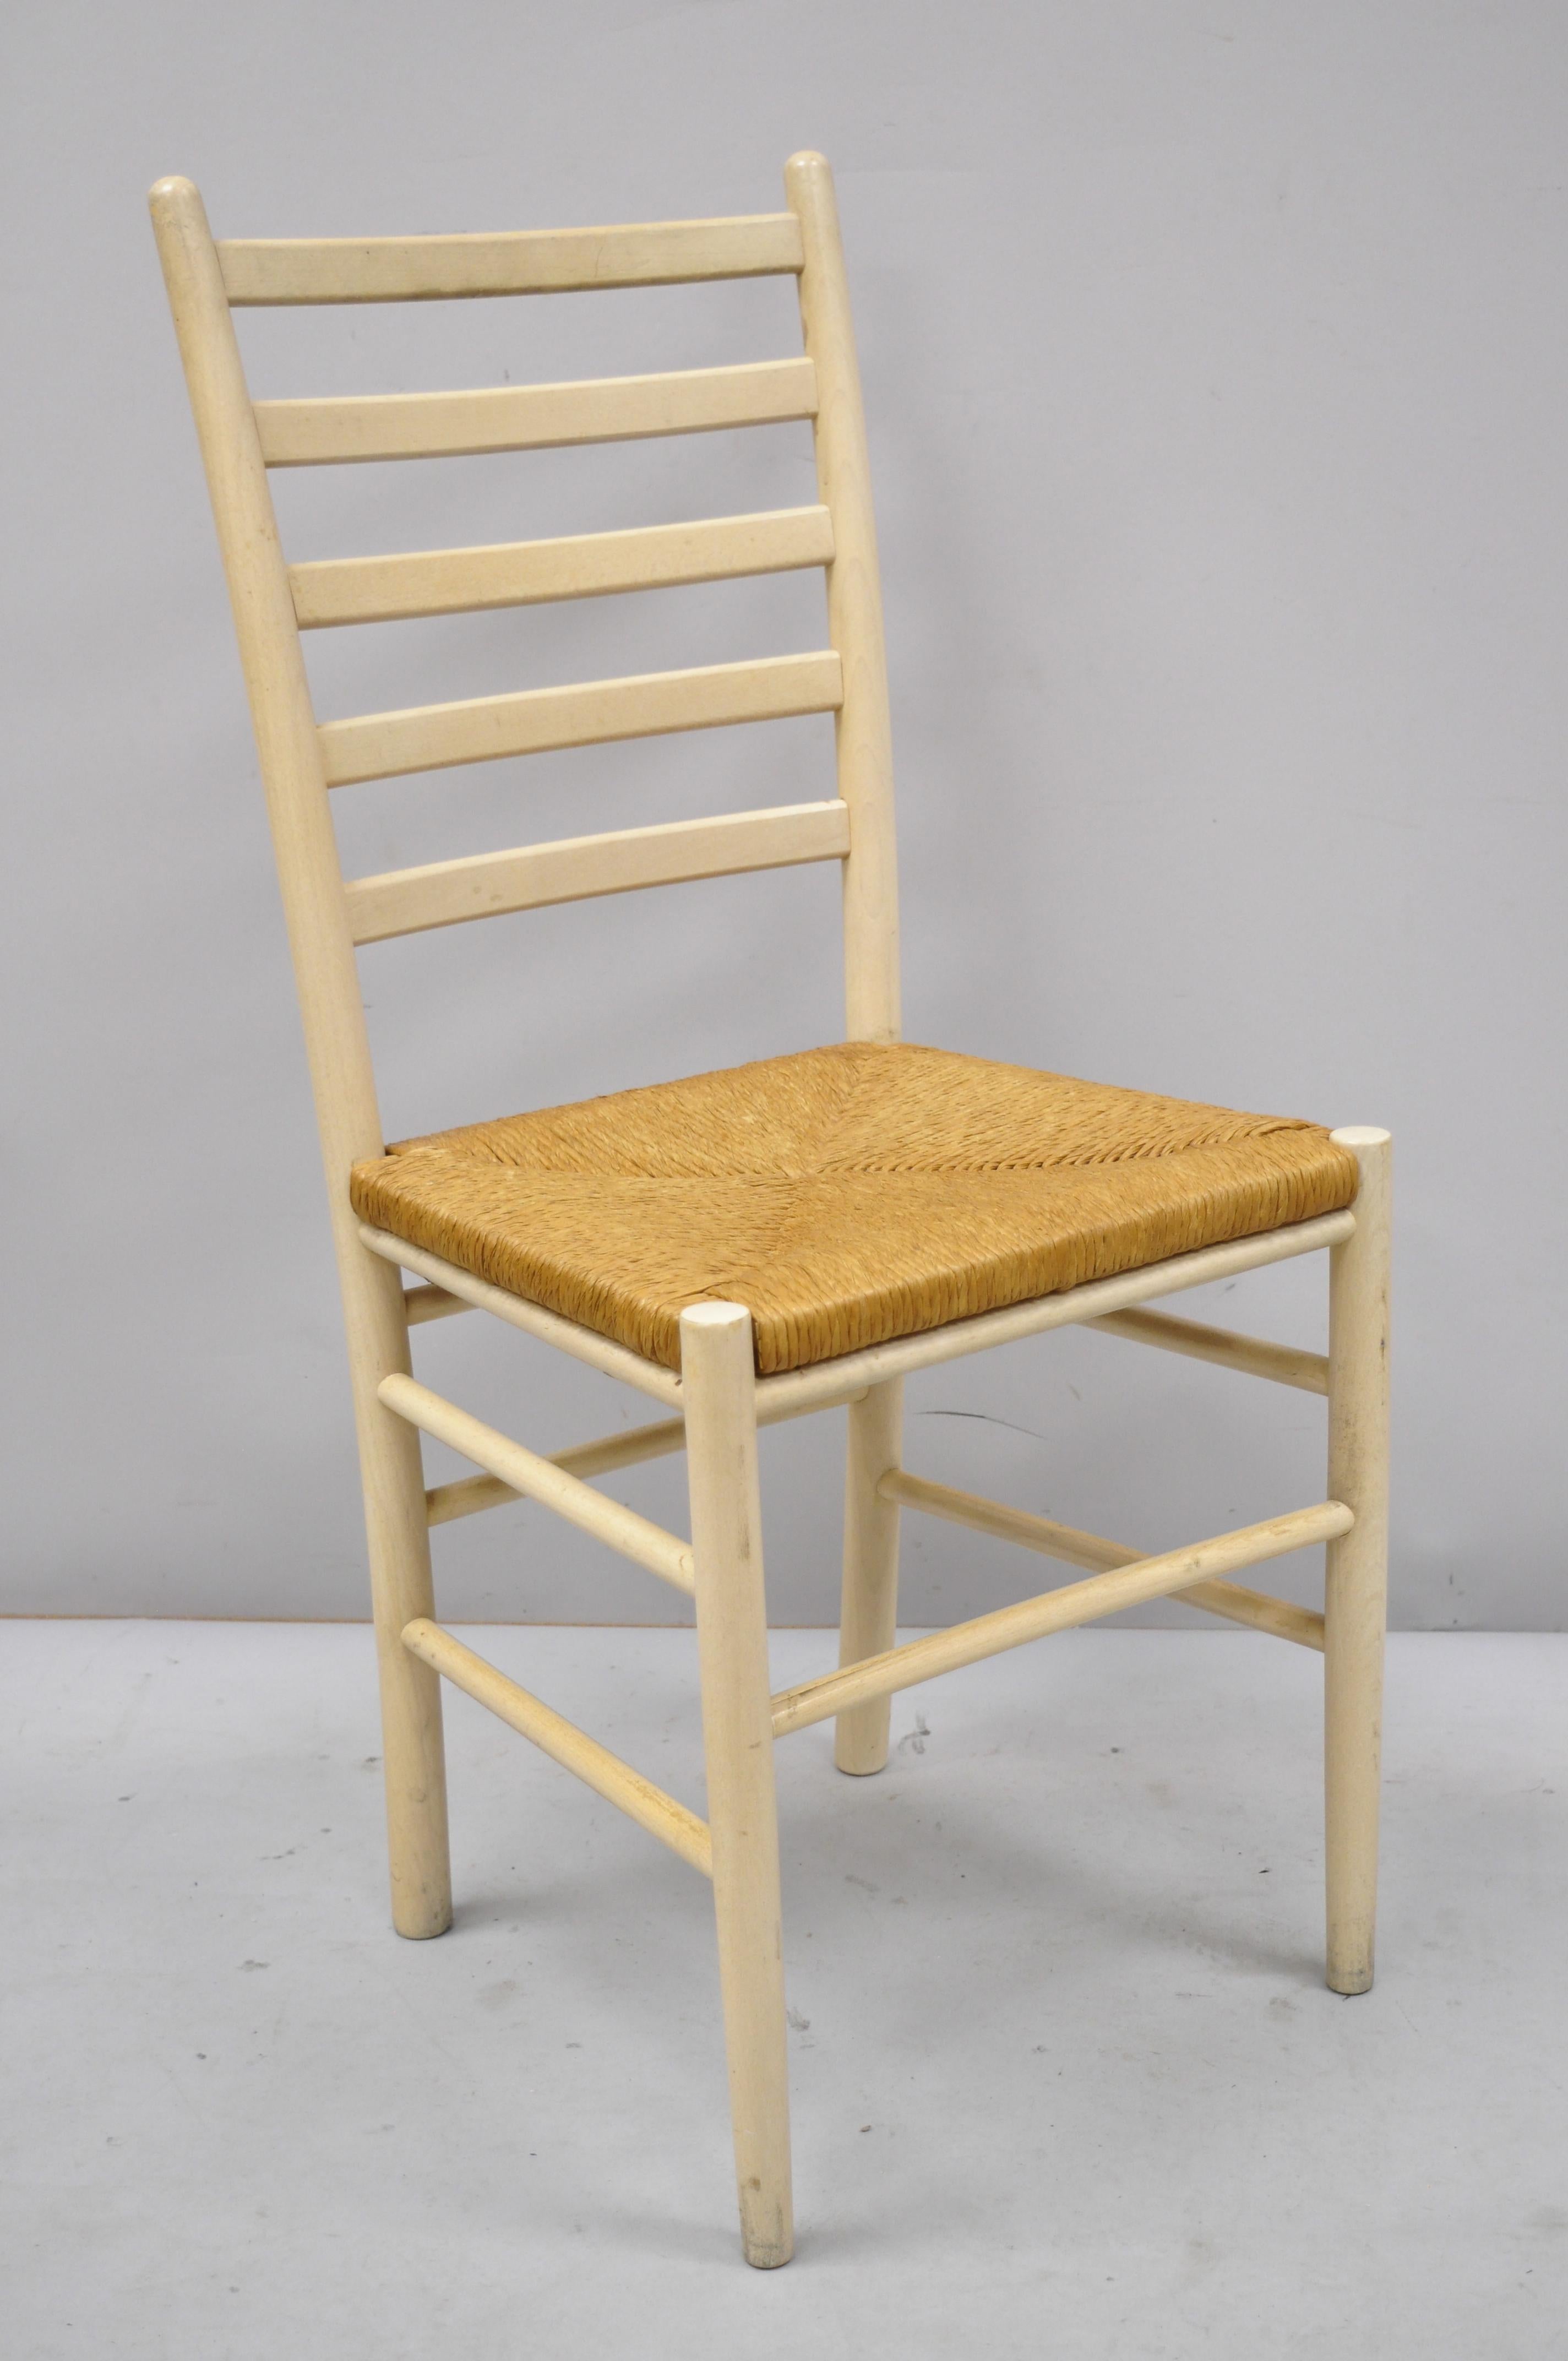 Set of 6 vintage midcentury Italian modern ladder back rush seat dining chairs. Listing includes (6) side chairs, woven rope seats, sleek ladder backs, solid wood frame, circa mid-late 20th century. Measurements: 37